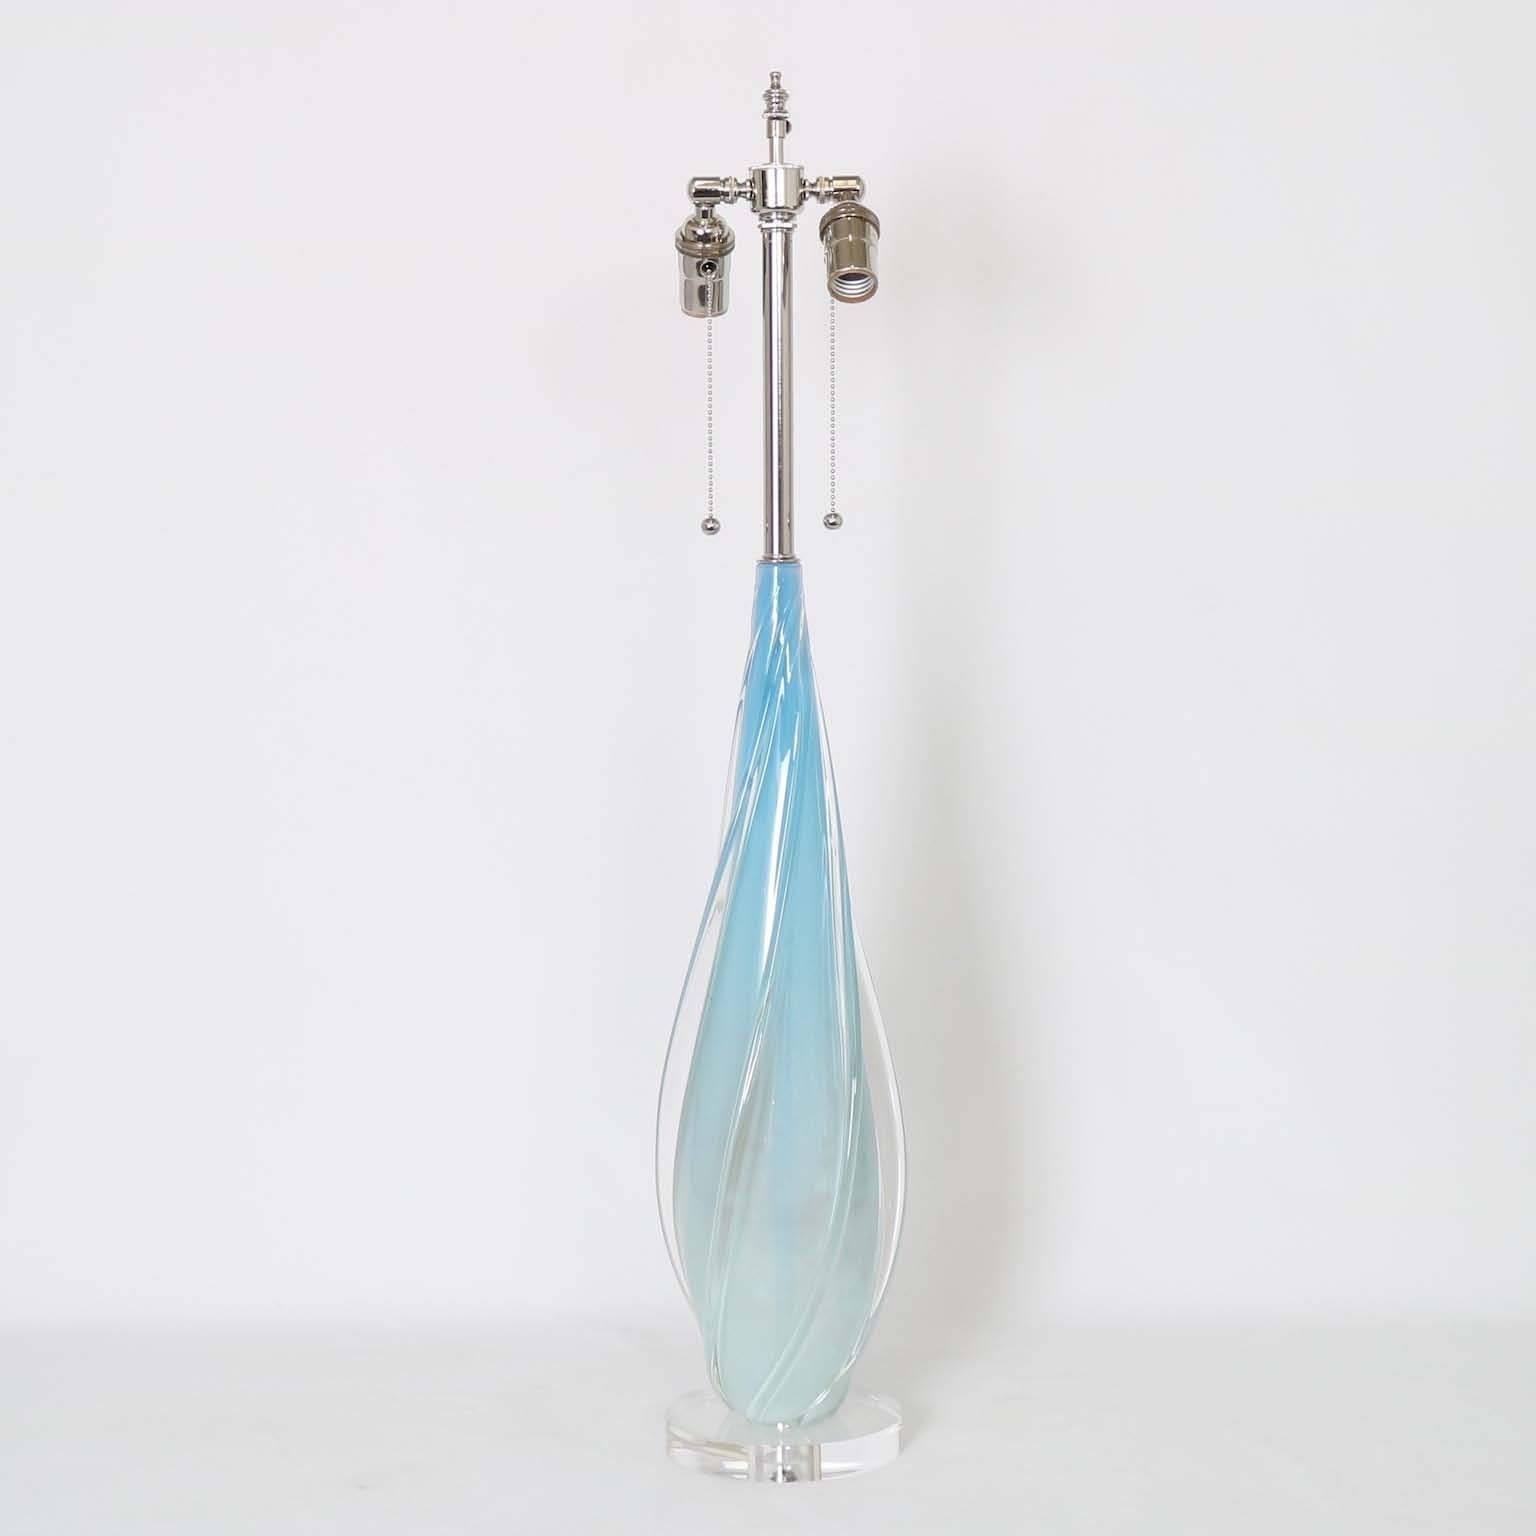 Opaline with blue in degrade Murano glass lamp by Seguso, with clear applied glass vertical swirling ribs. Mounted on a Lucite base. The noted height is top the finial. The height to the top of the glass is 22.5 in (57 cm). Fully restored with all